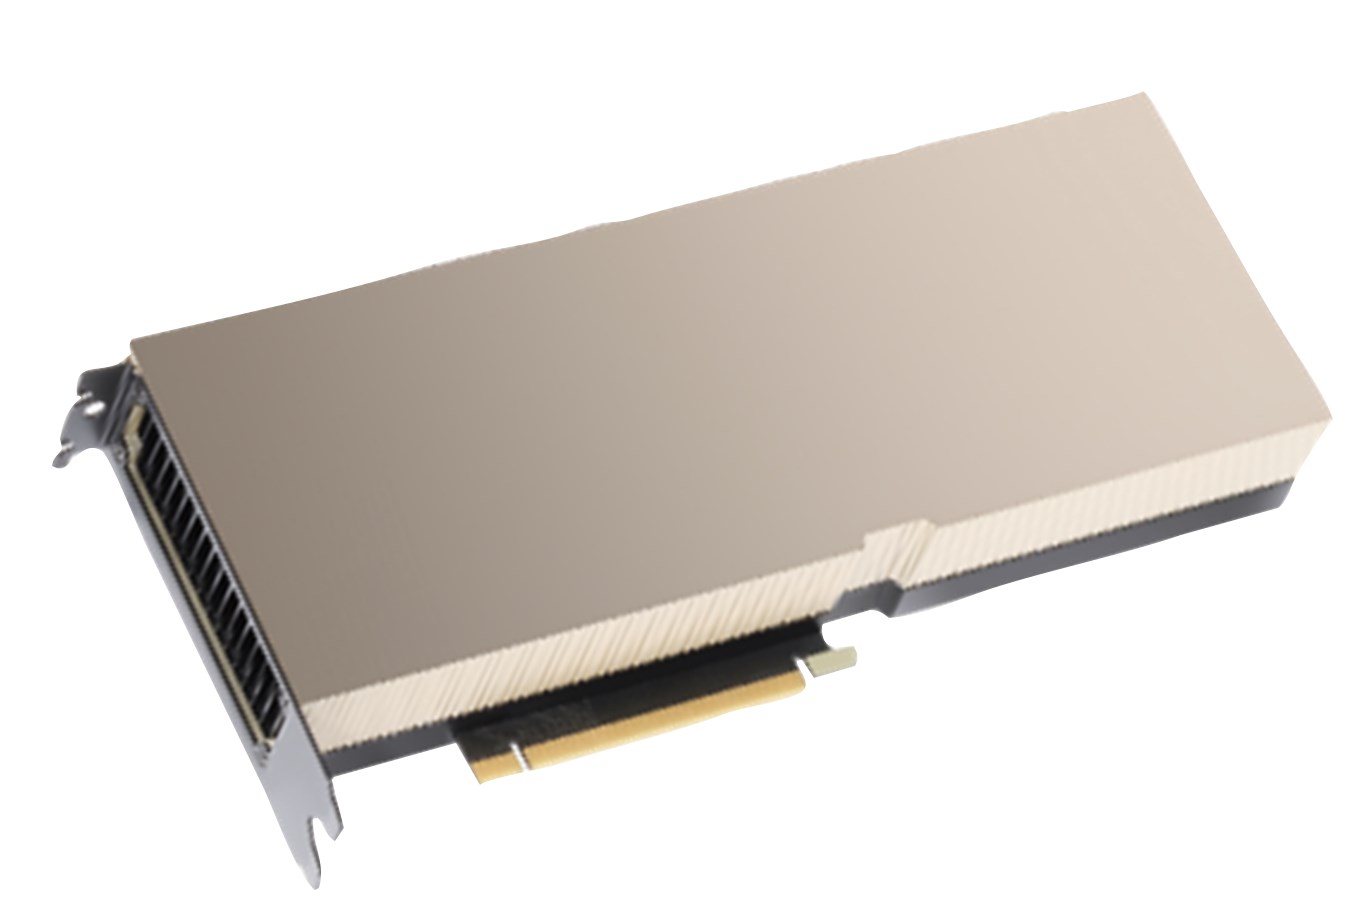 NVIDIA H100 80GB PCIe Accelerator for HPE0 